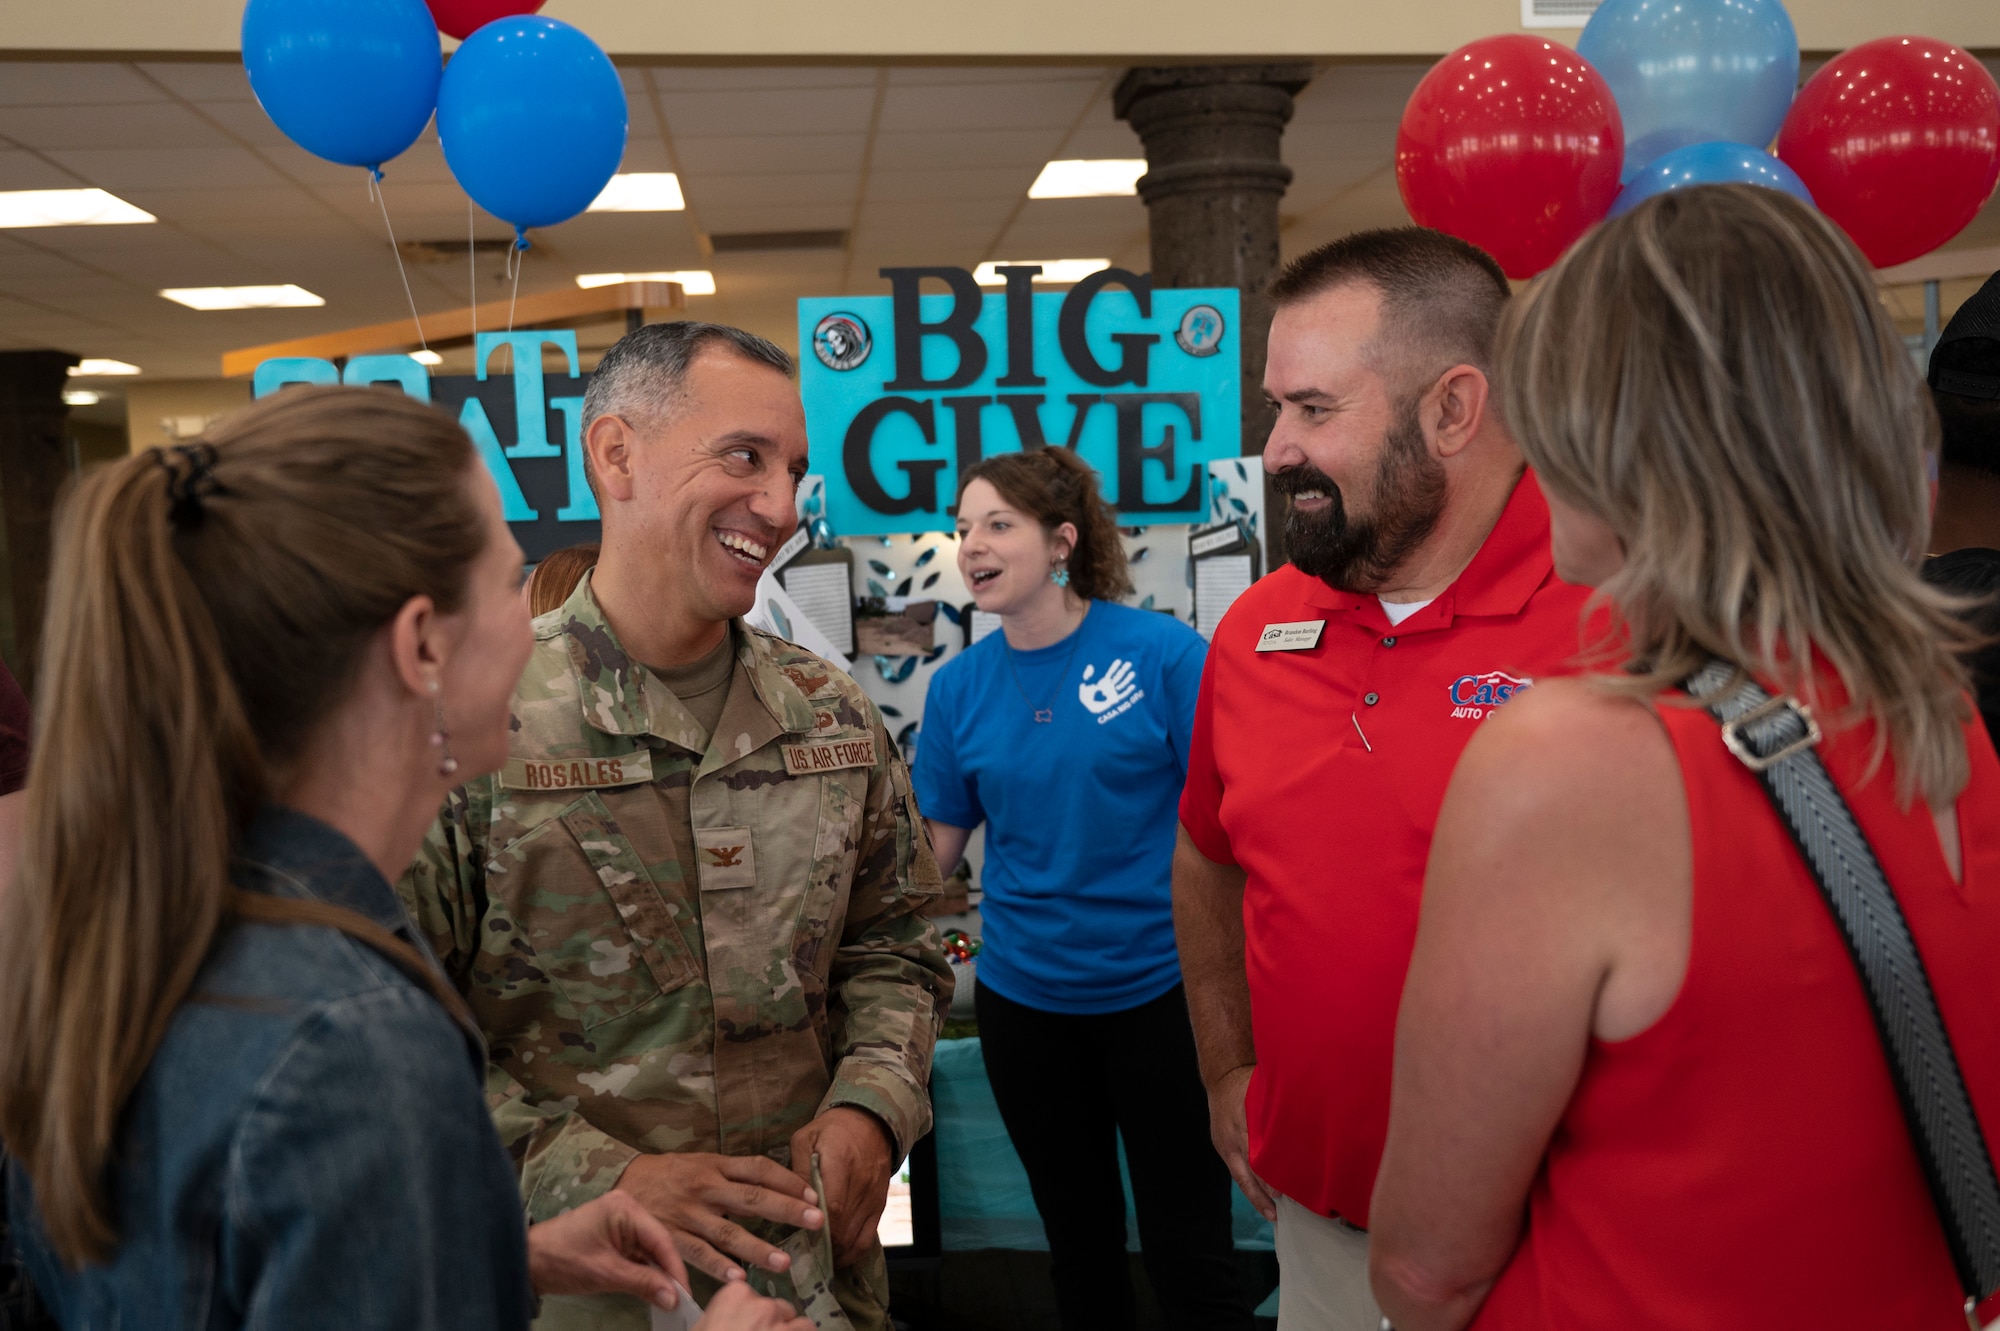 U.S. Air Force Col. Alfred Rosales, 49th Wing deputy commander, center, and members from Casa Auto Group discuss community projects during the closing ceremony in Alamogordo, New Mexico, July 28, 2023. The 13th annual Big Give event was composed of active duty Airmen, civilians and retirees working together to complete projects that benefit the local community. (U.S. Air Force photo by Airman 1st Class Michelle Ferrari)